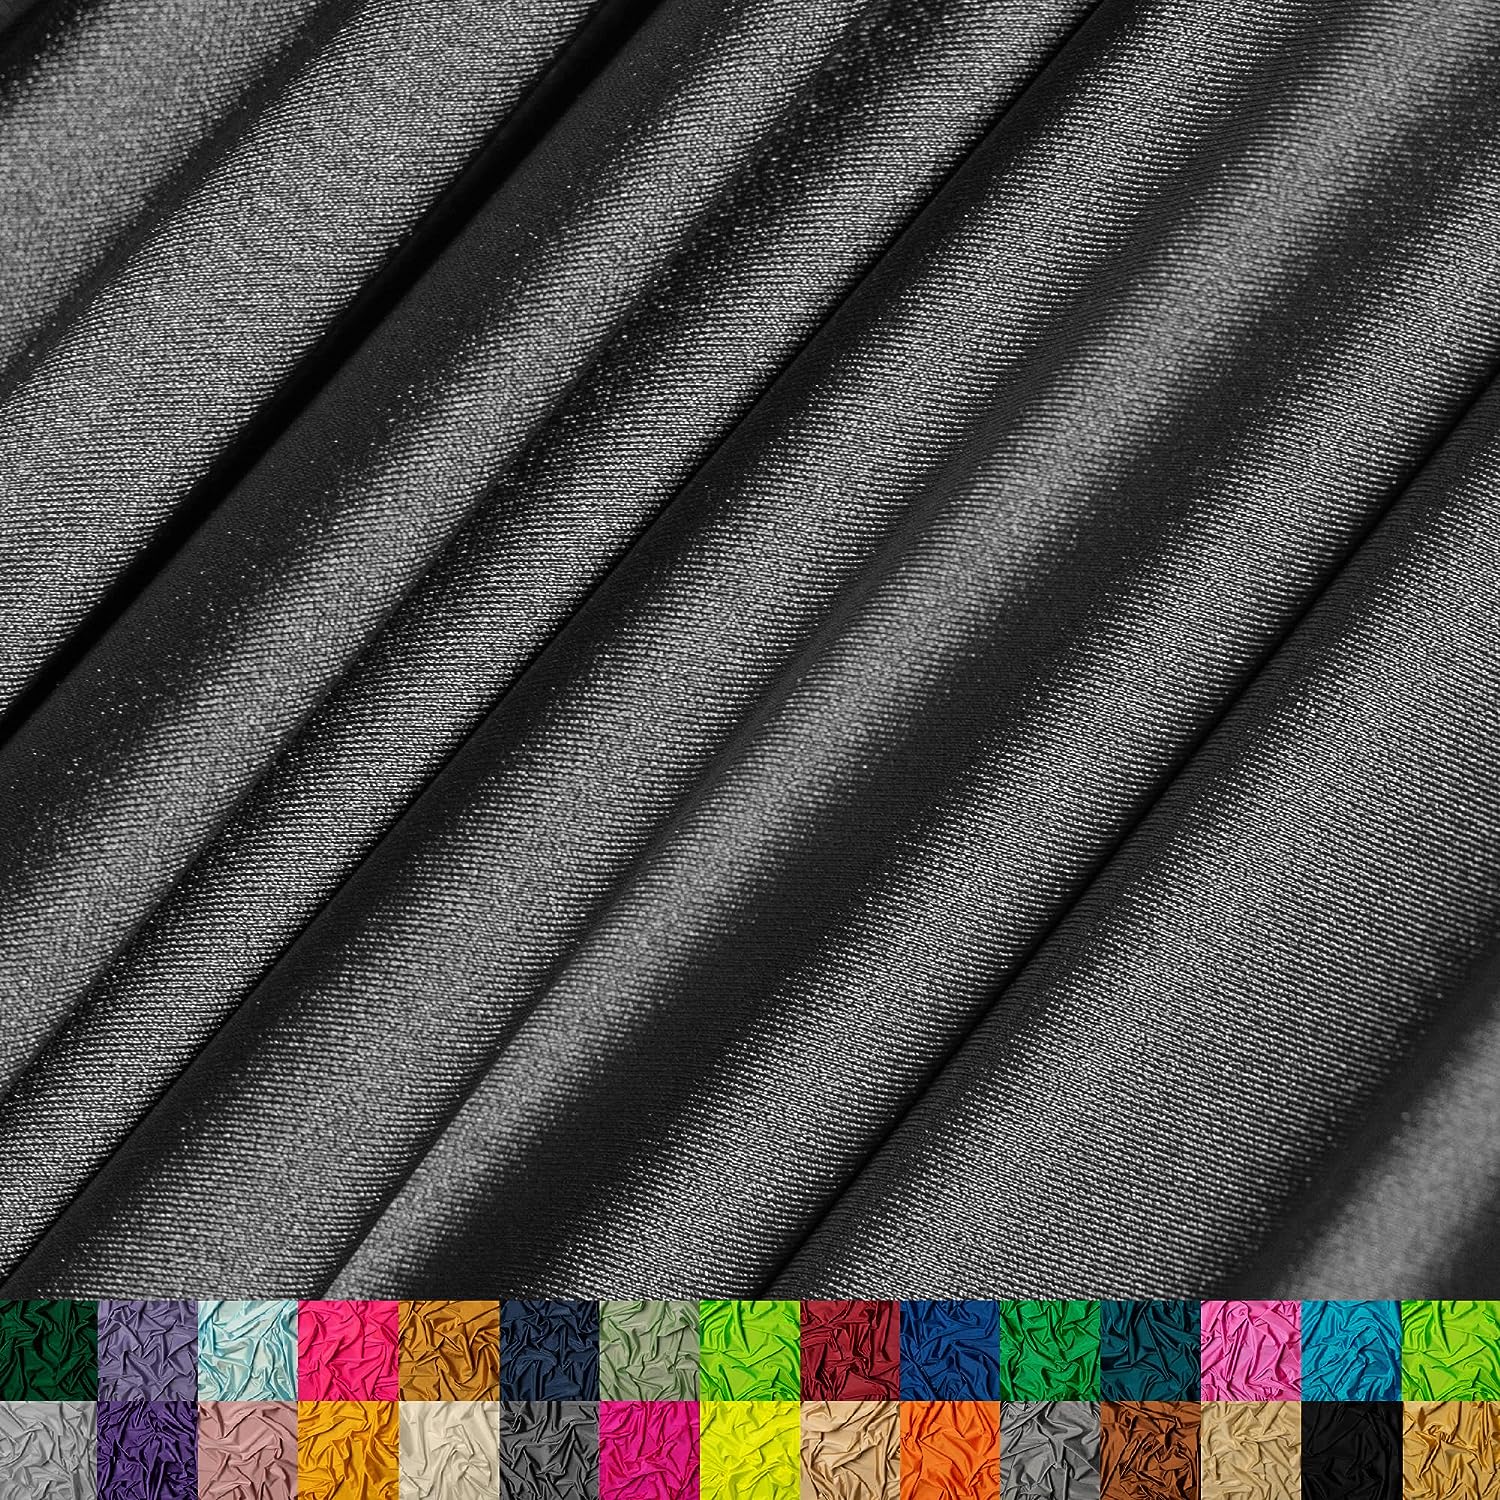 Charcoal Luxury Nylon Spandex Fabric By The YardICE FABRICSICE FABRICSBy The Yard (60" Width)Charcoal Luxury Nylon Spandex Fabric By The Yard ICE FABRICS